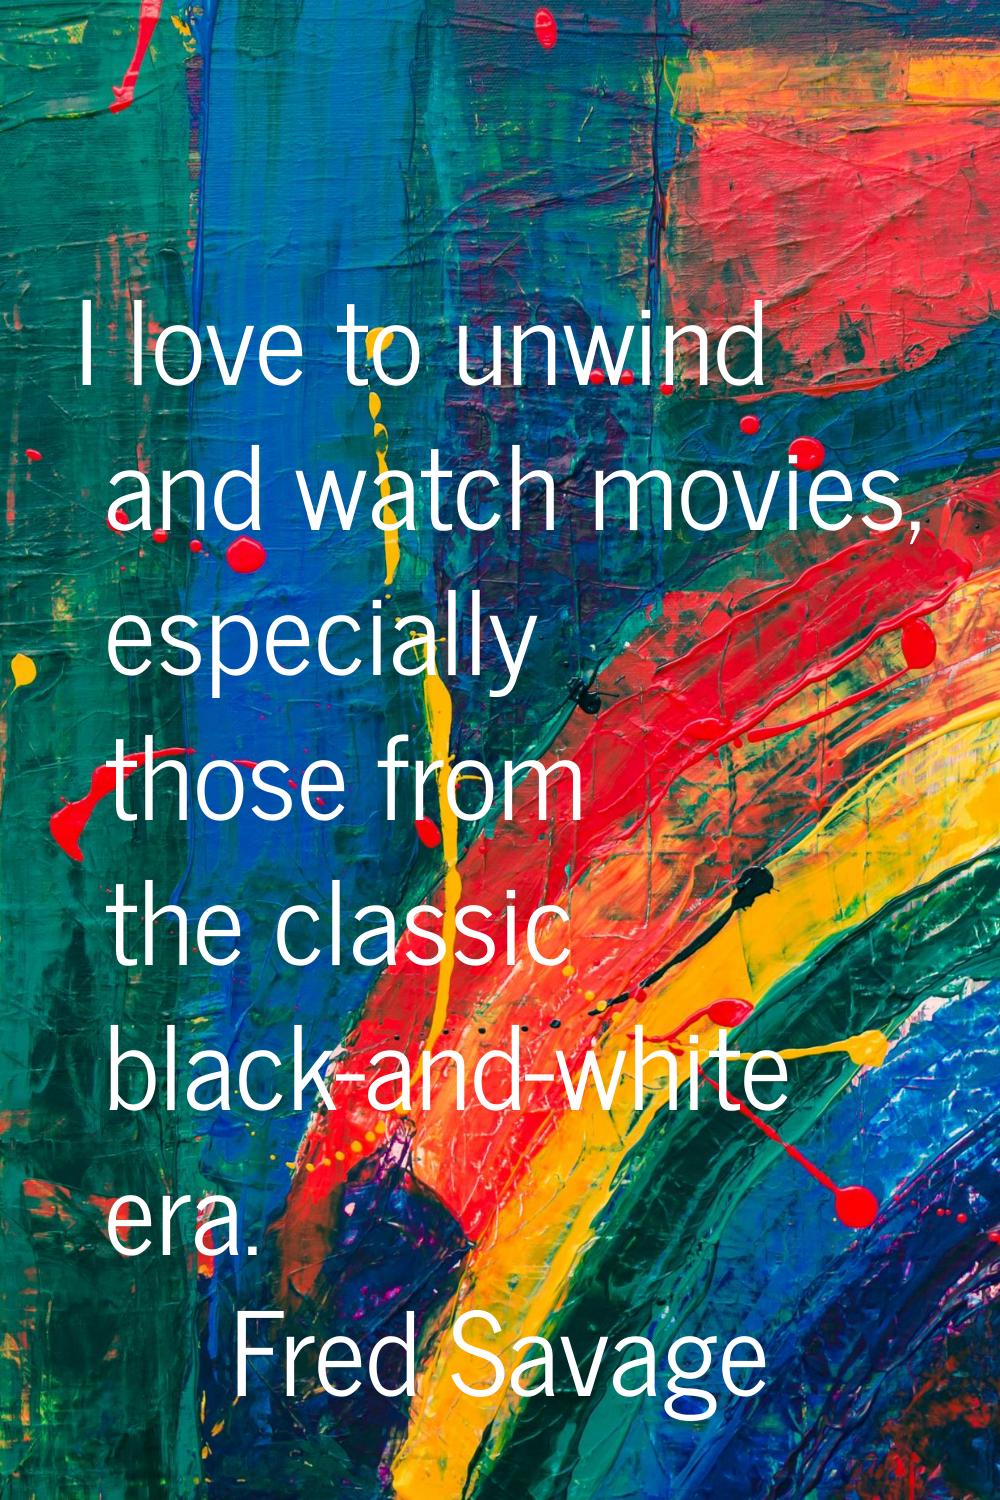 I love to unwind and watch movies, especially those from the classic black-and-white era.